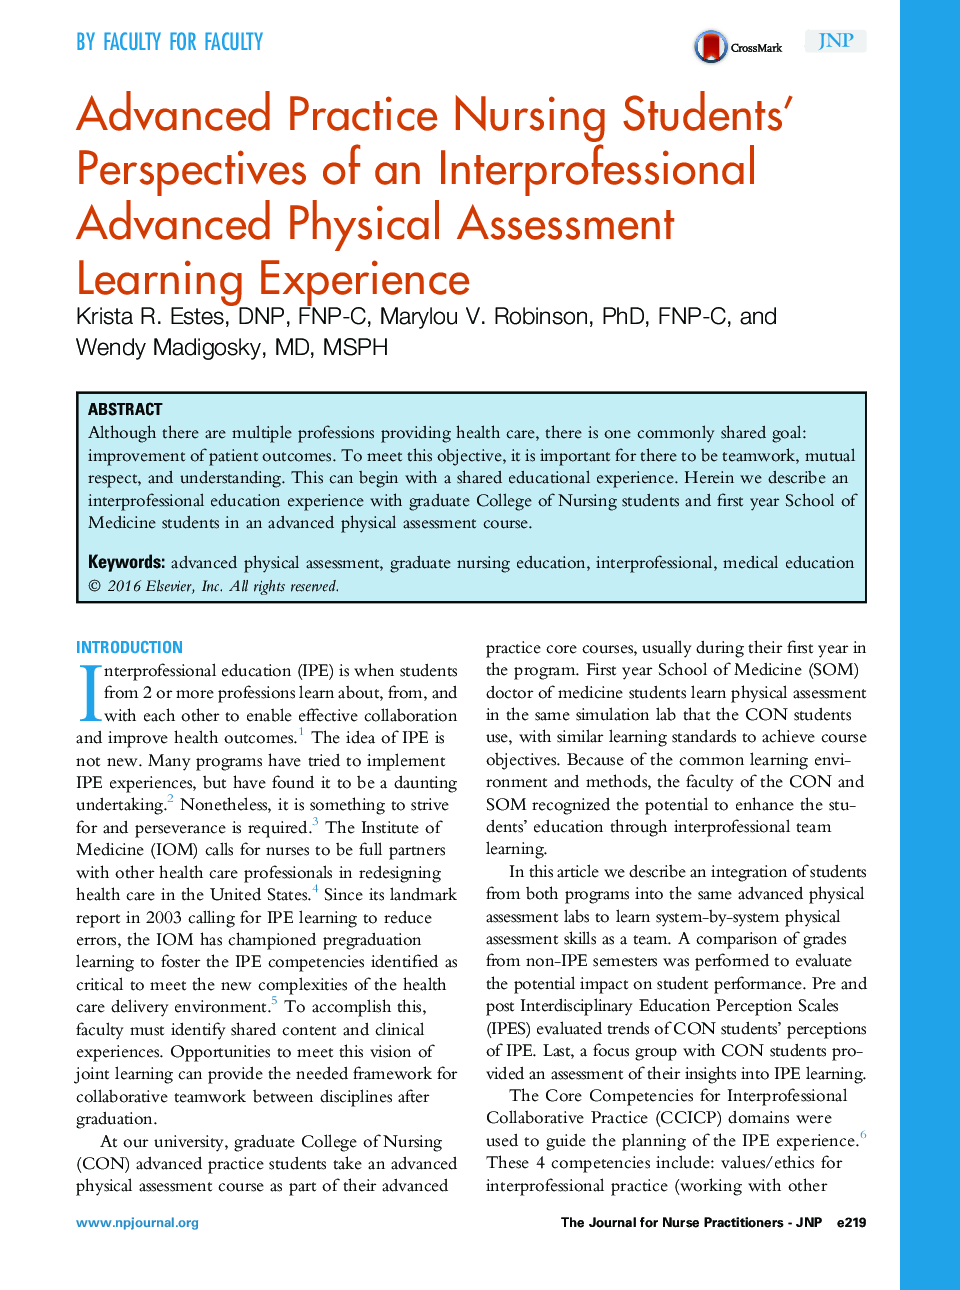 Advanced Practice Nursing Students' Perspectives of an Interprofessional Advanced Physical Assessment Learning Experience